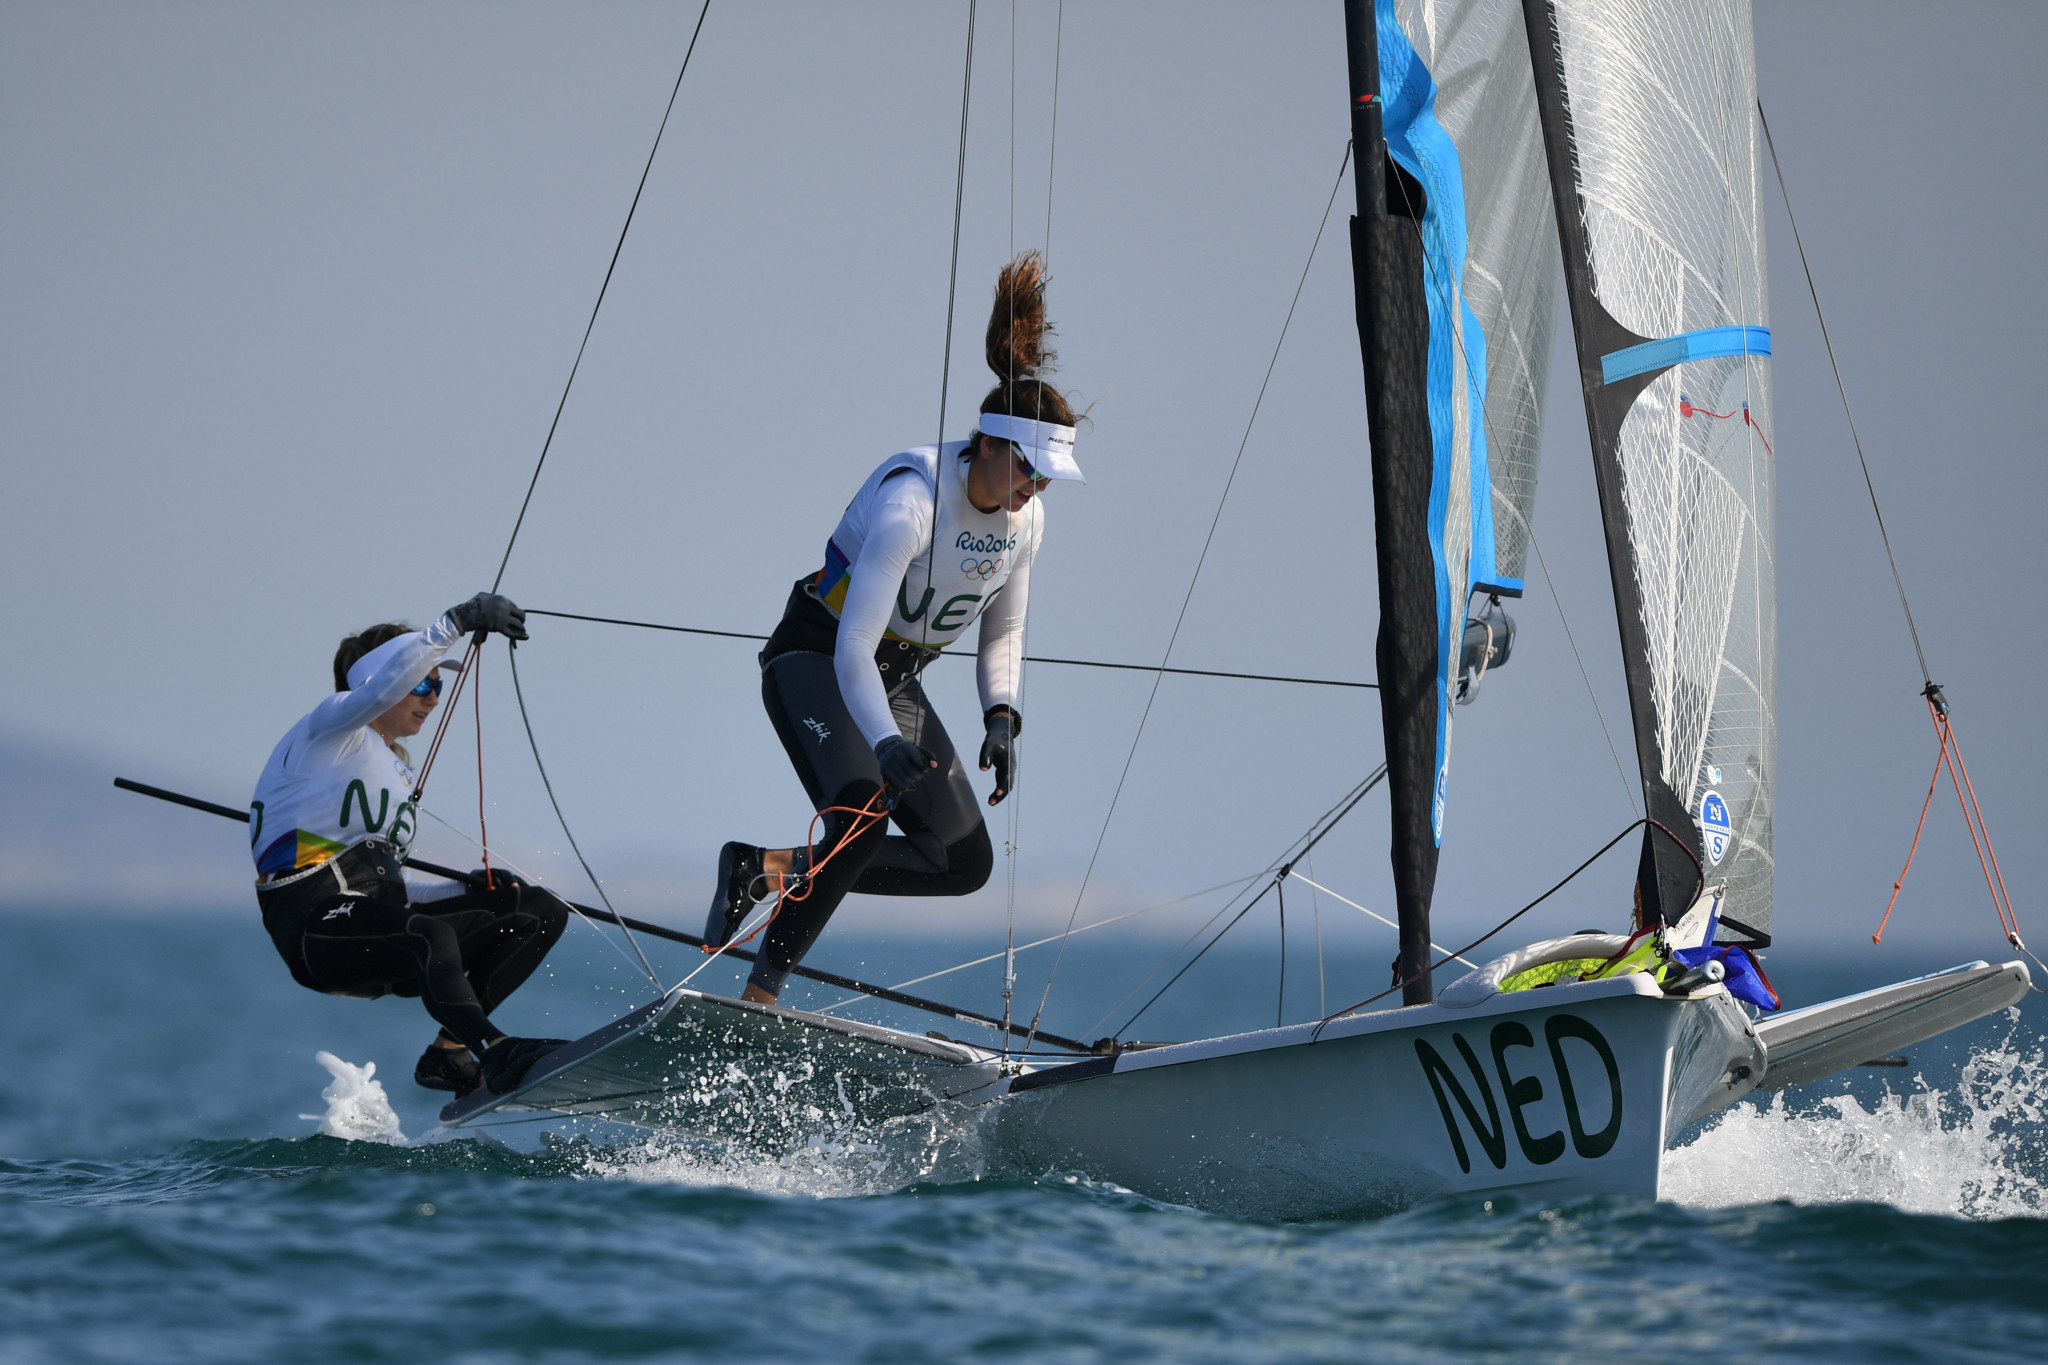 Dutch Tokyo 2020 choices flying high in 49er and 49erFX at World Sailing Cup in Medemblik